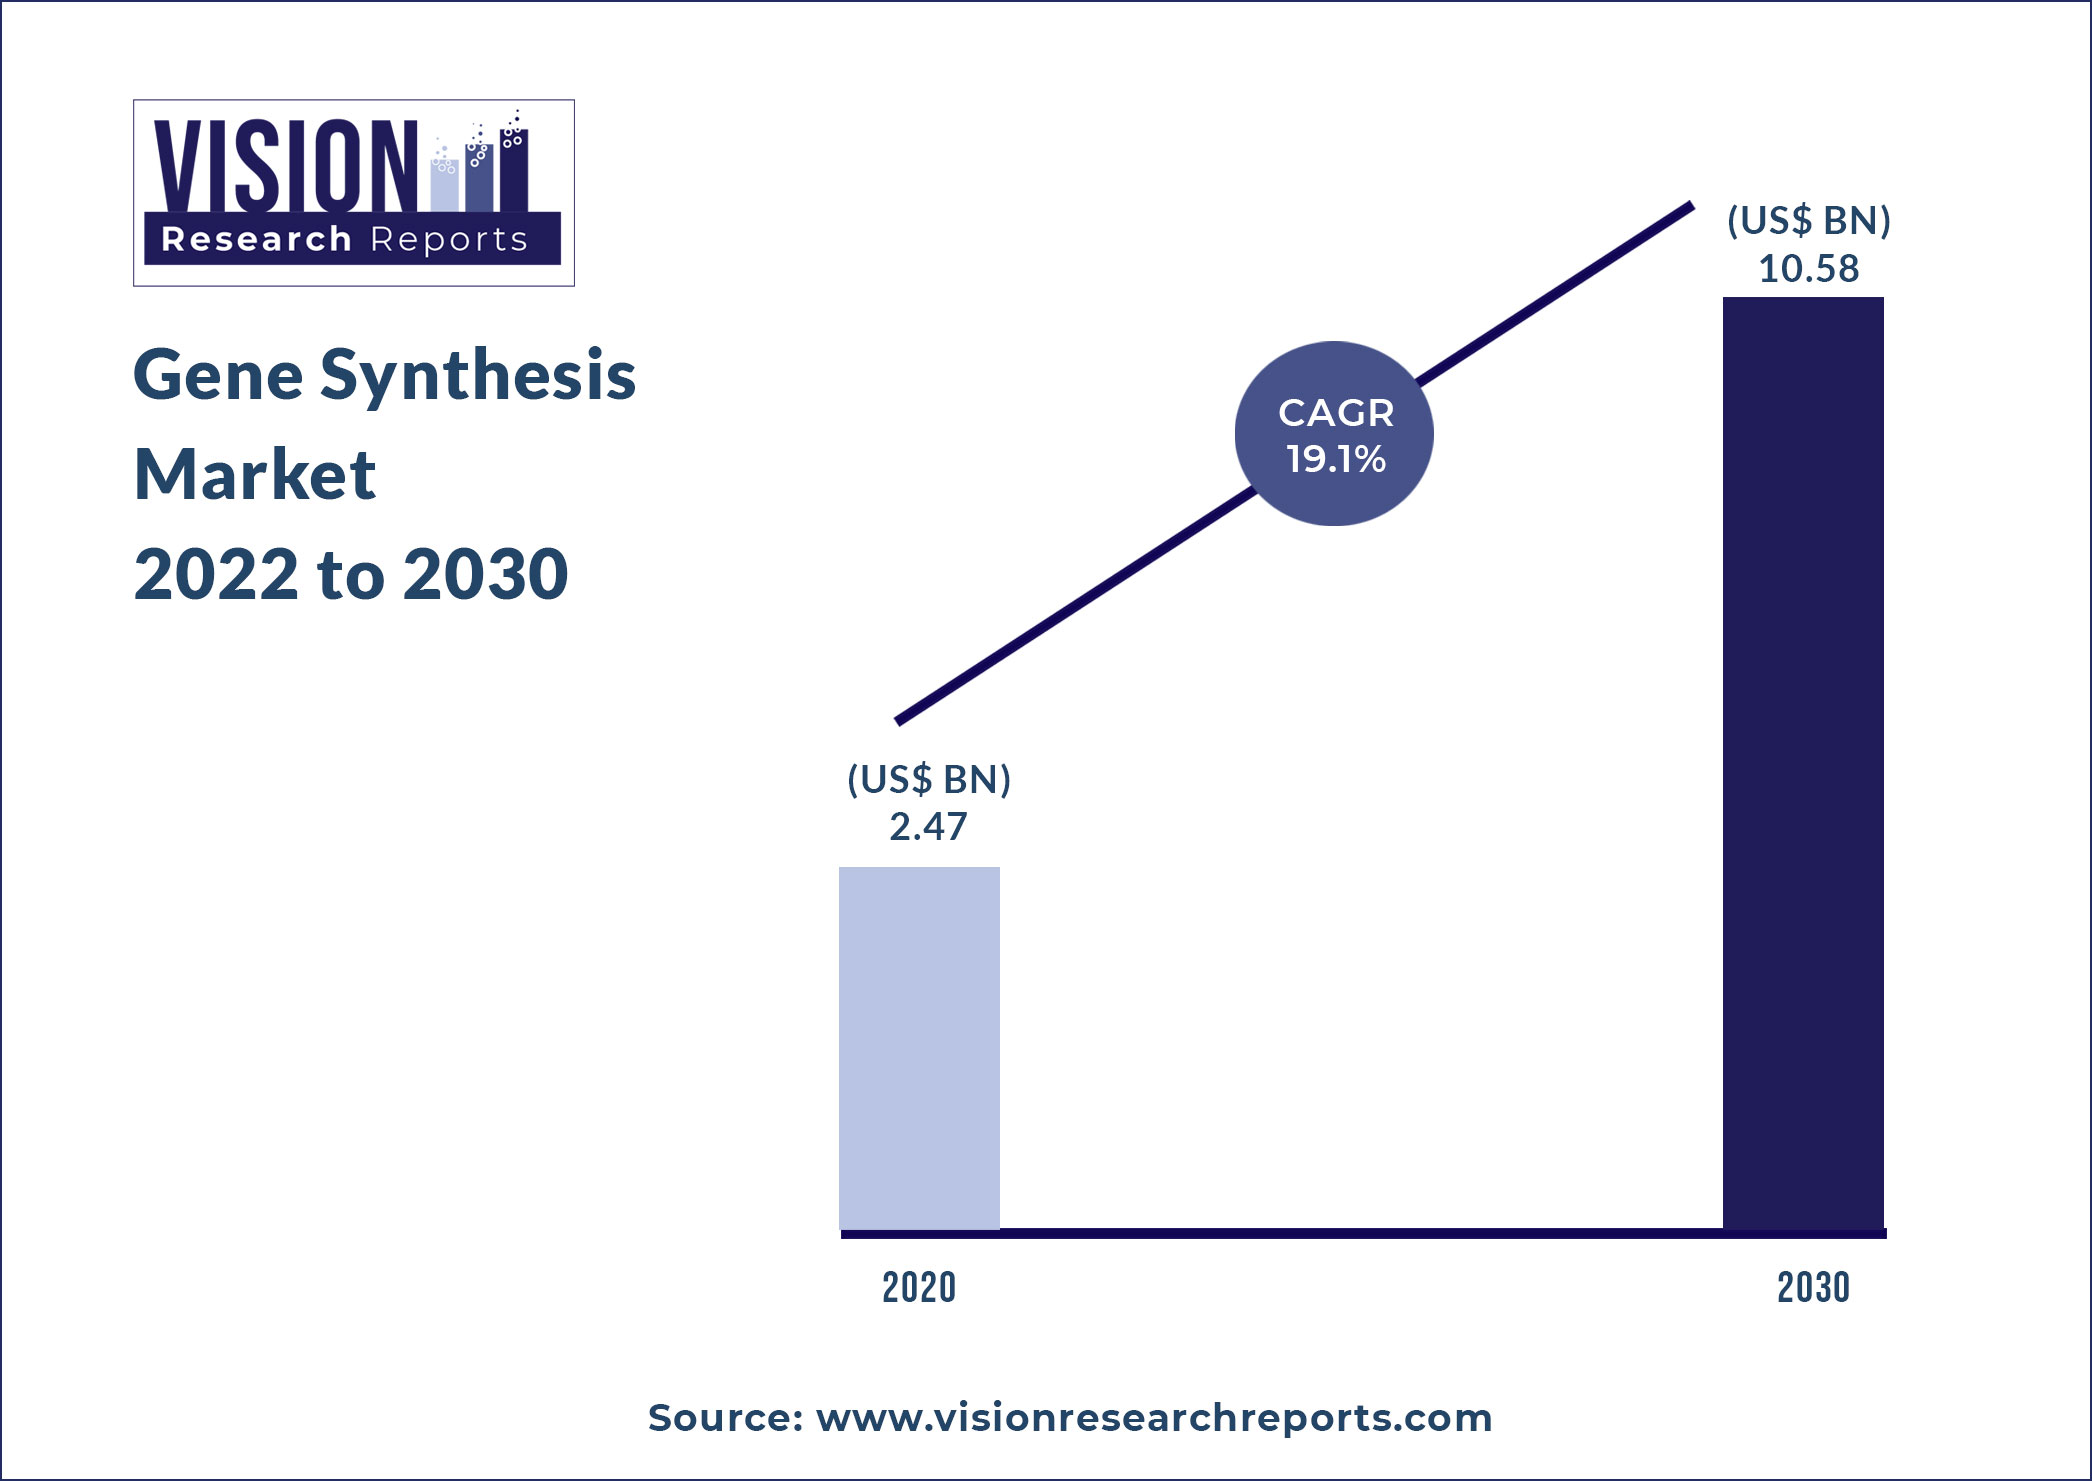 Gene Synthesis Market Size 2022 to 2030